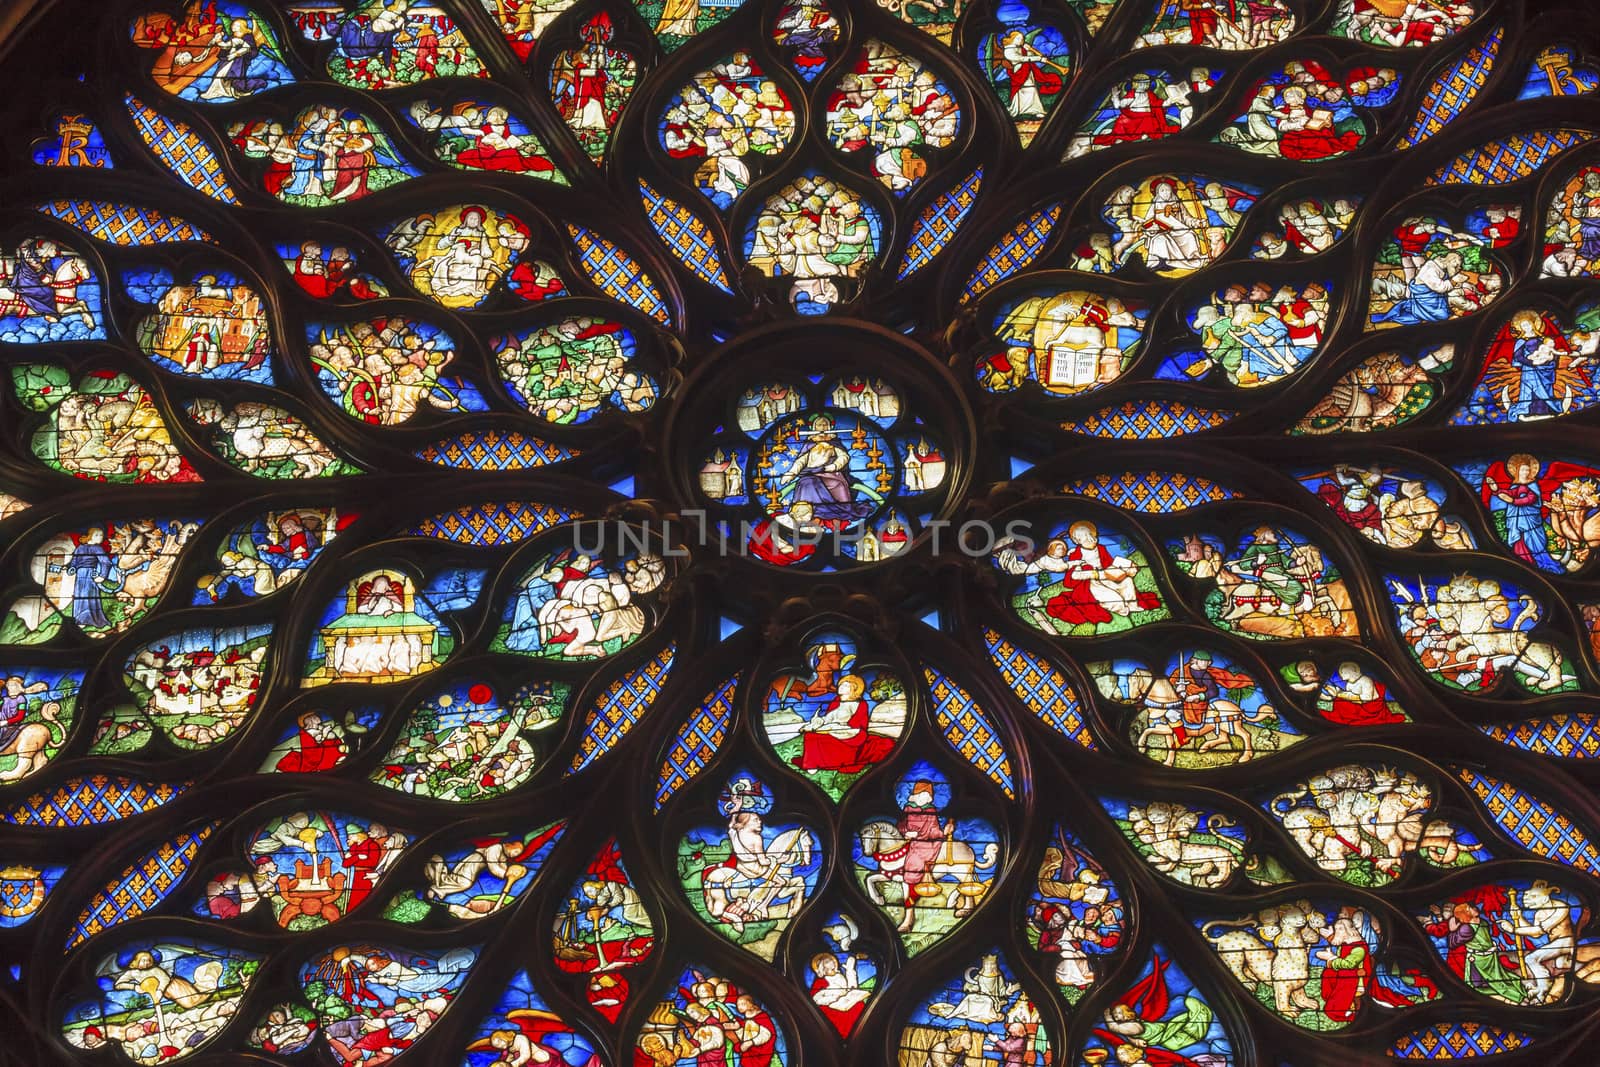 Jesus Christ Rose Window Stained Glass Sainte Chapelle Paris by bill_perry